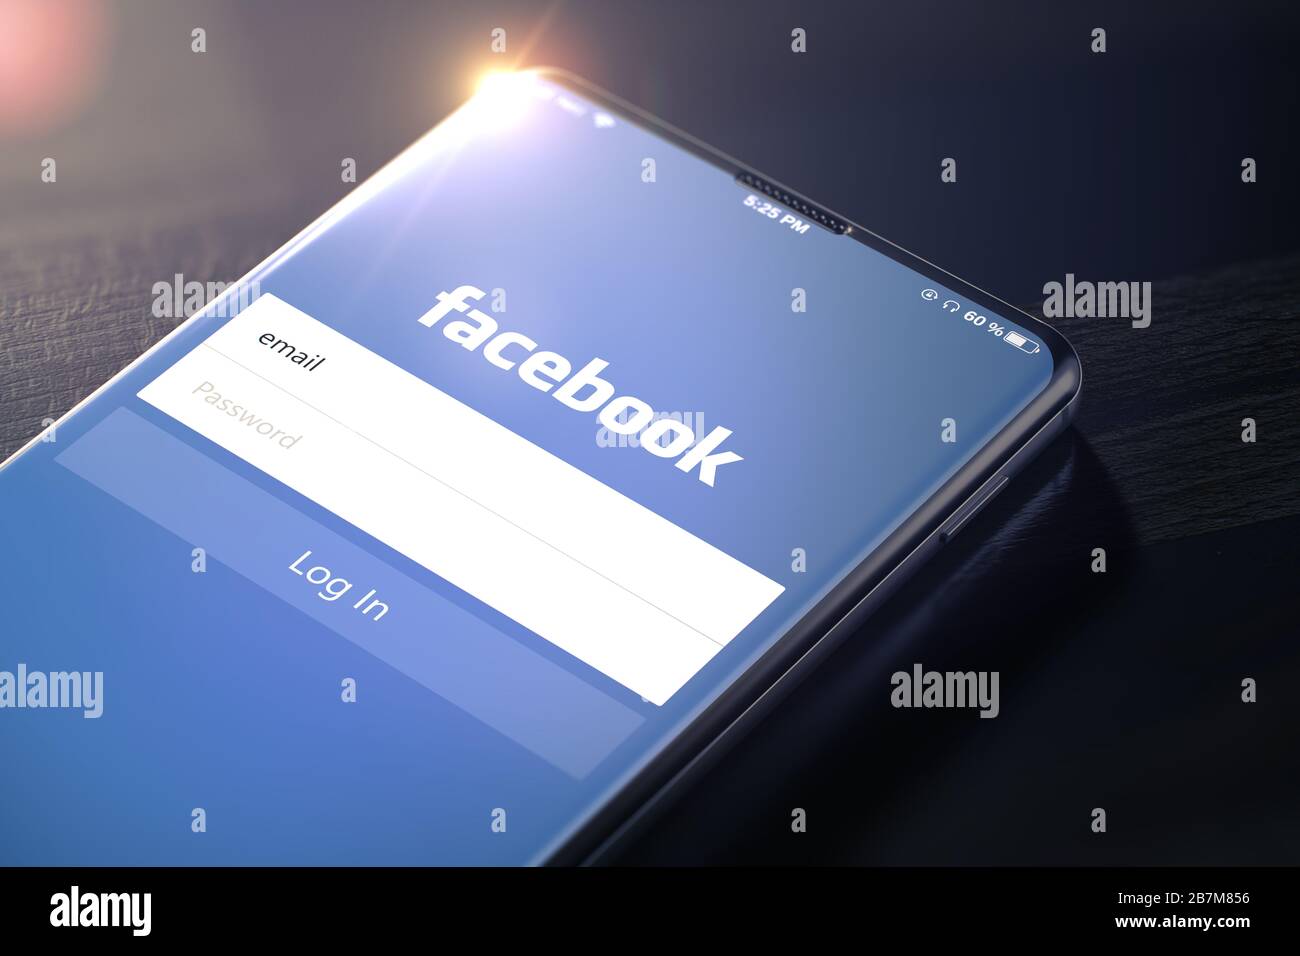 KYIV, UKRAINE-JANUARY, 2020: Facebook on Smartphone Screen. Facebook is a Most Popular Social Media Tool for Communication, Sharing Information and Content Between People in Internet. 3D Illustration Stock Photo